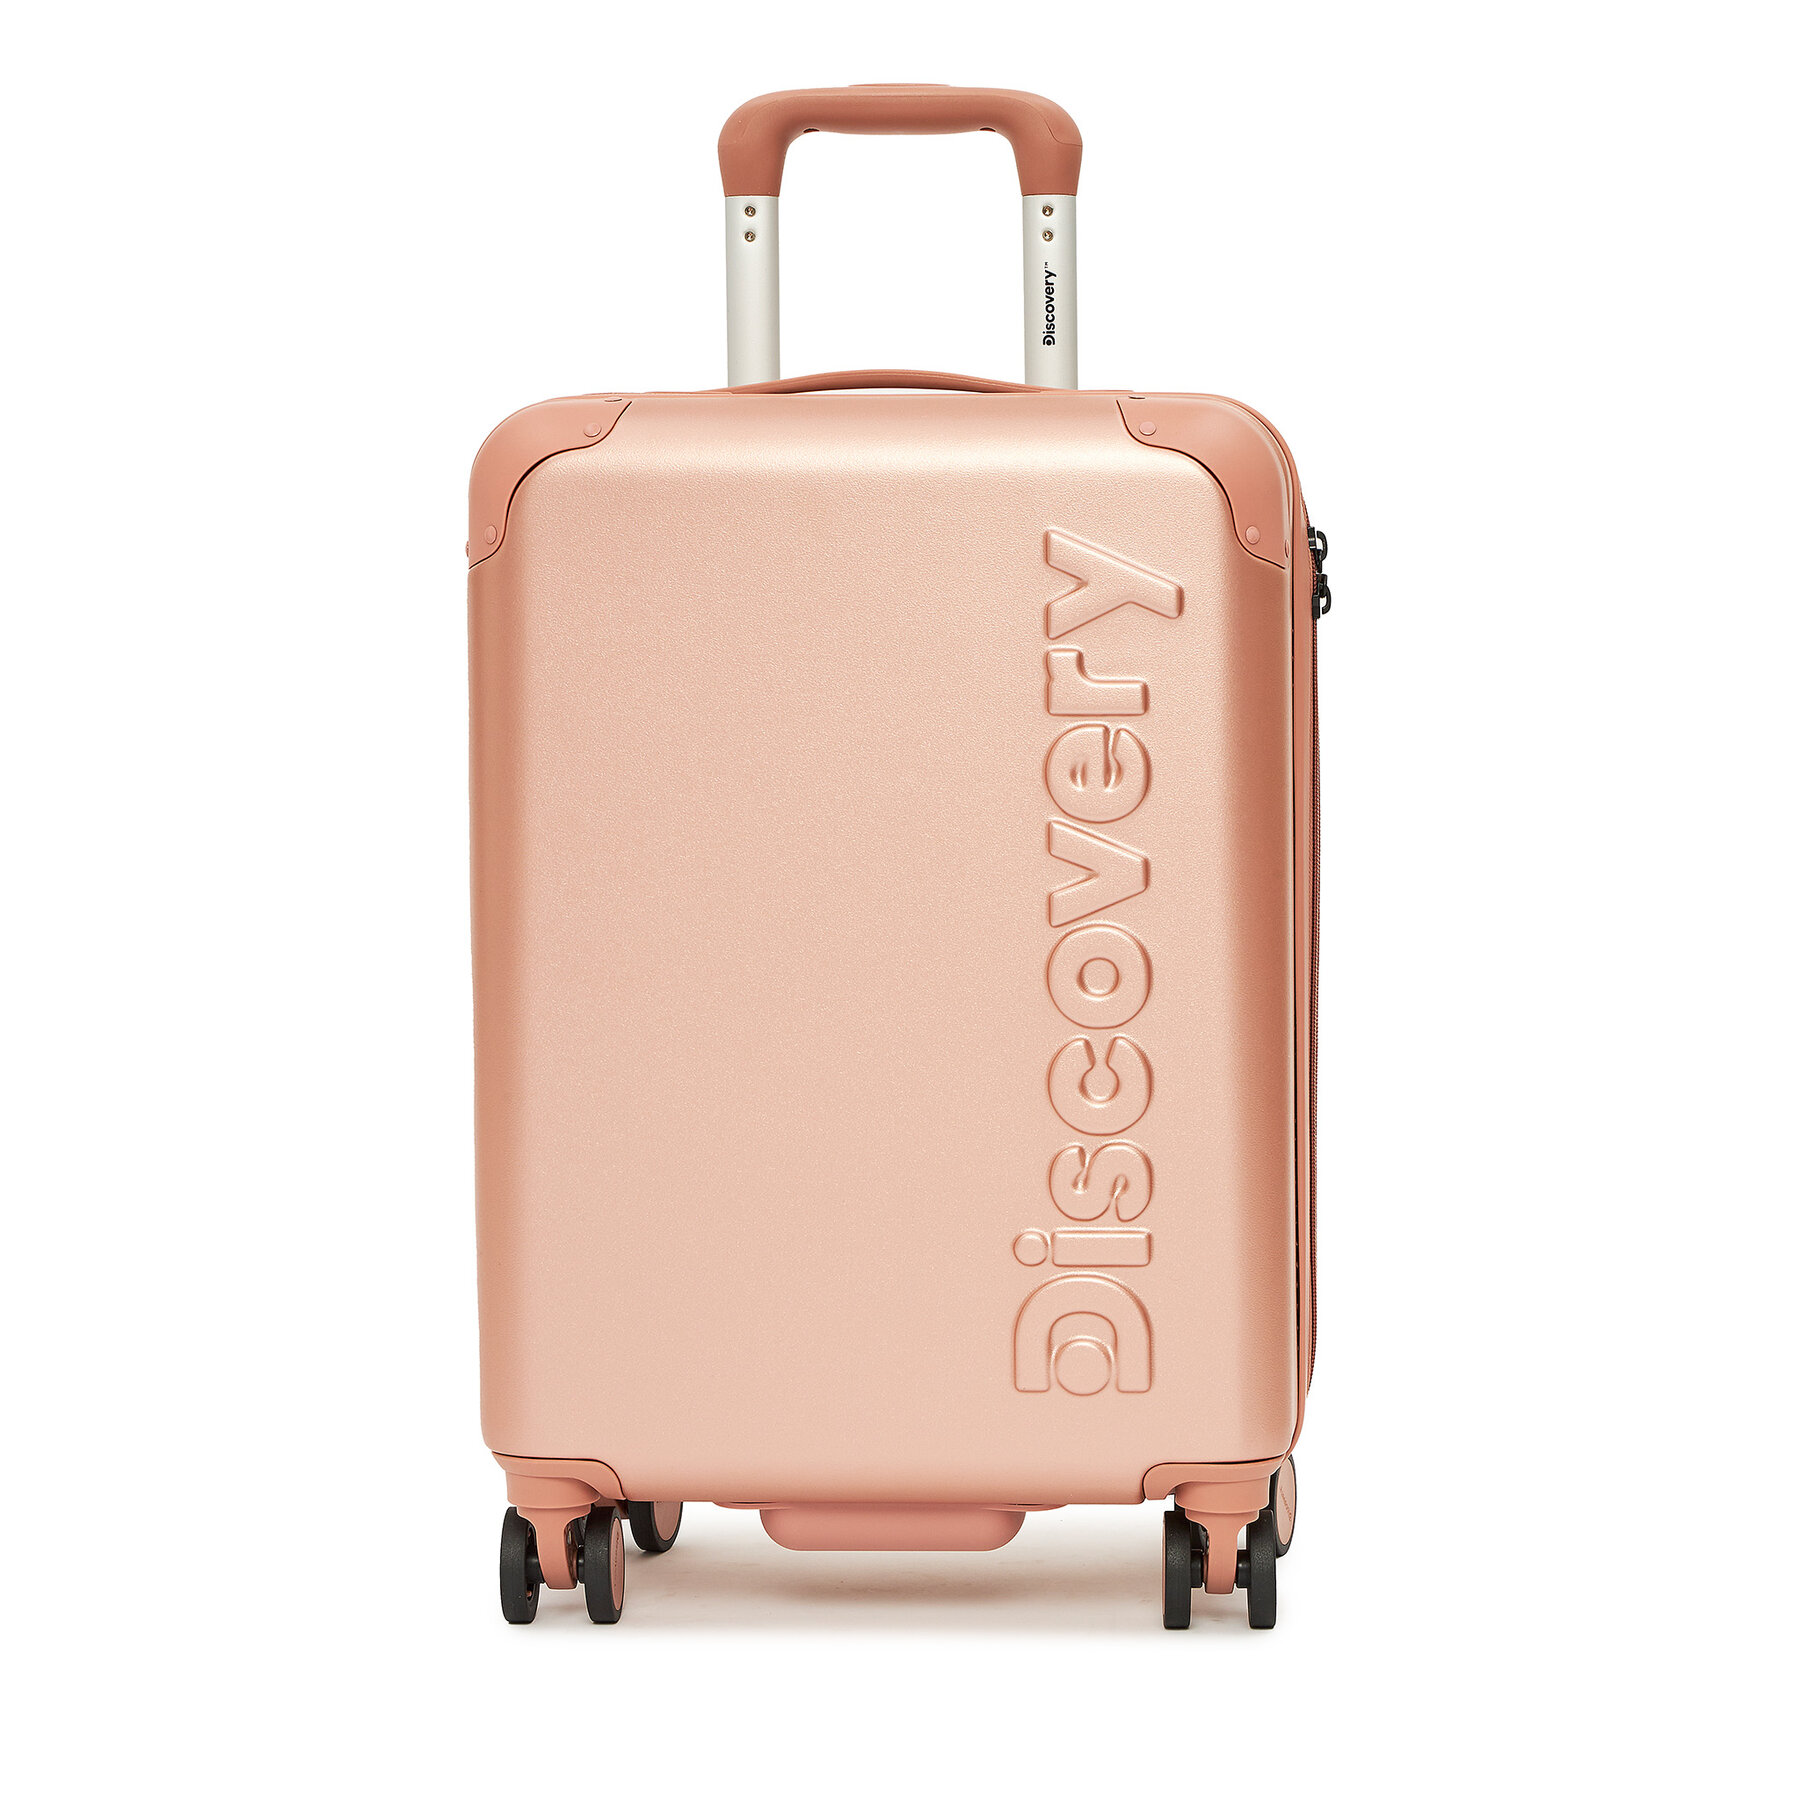 Kabinenkoffer Discovery Focus D005HA.49.14 Pink von Discovery